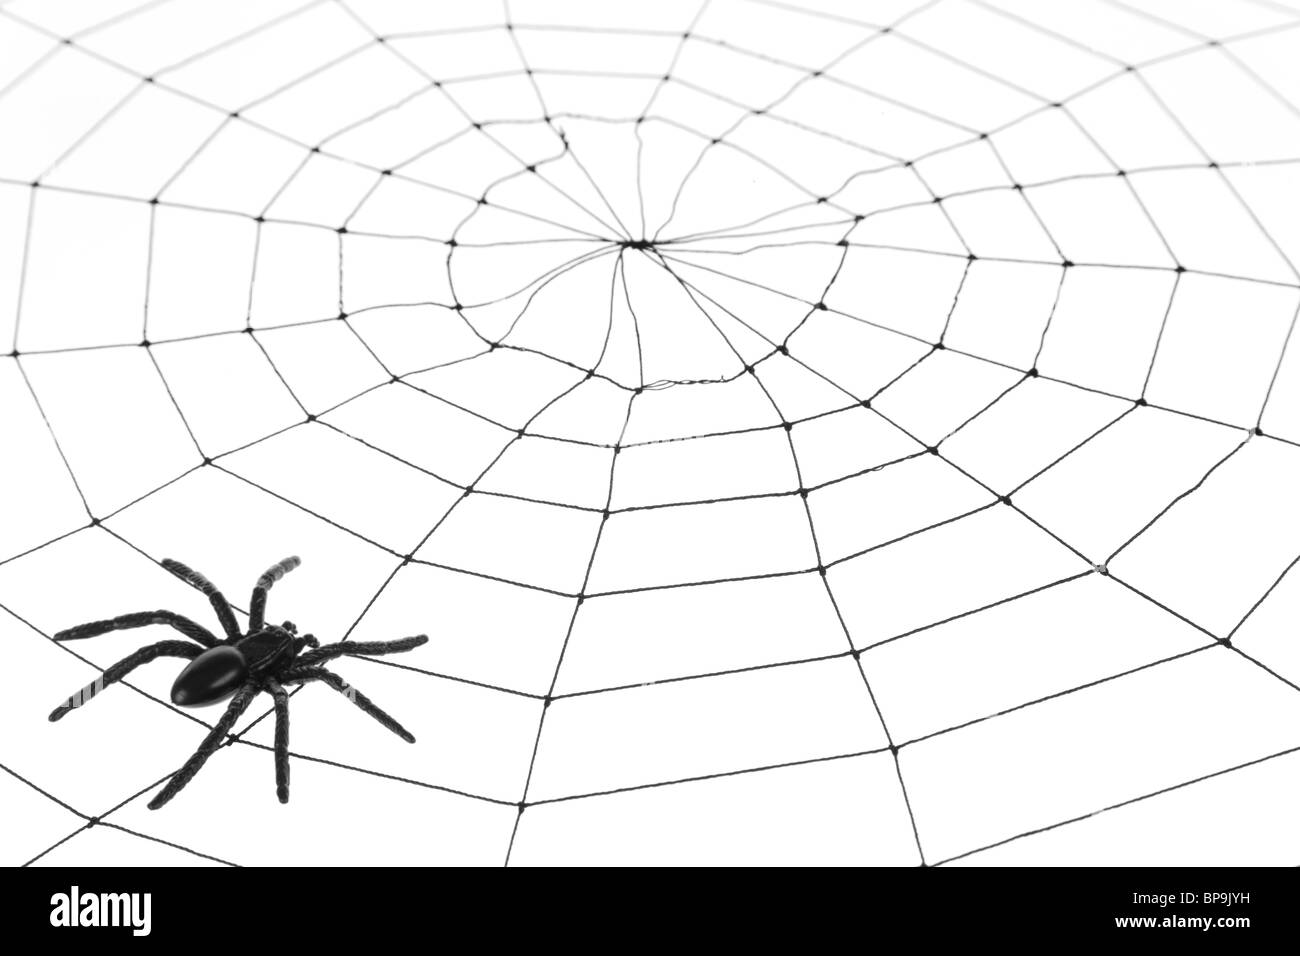 Spider Web for background use Stock Photo